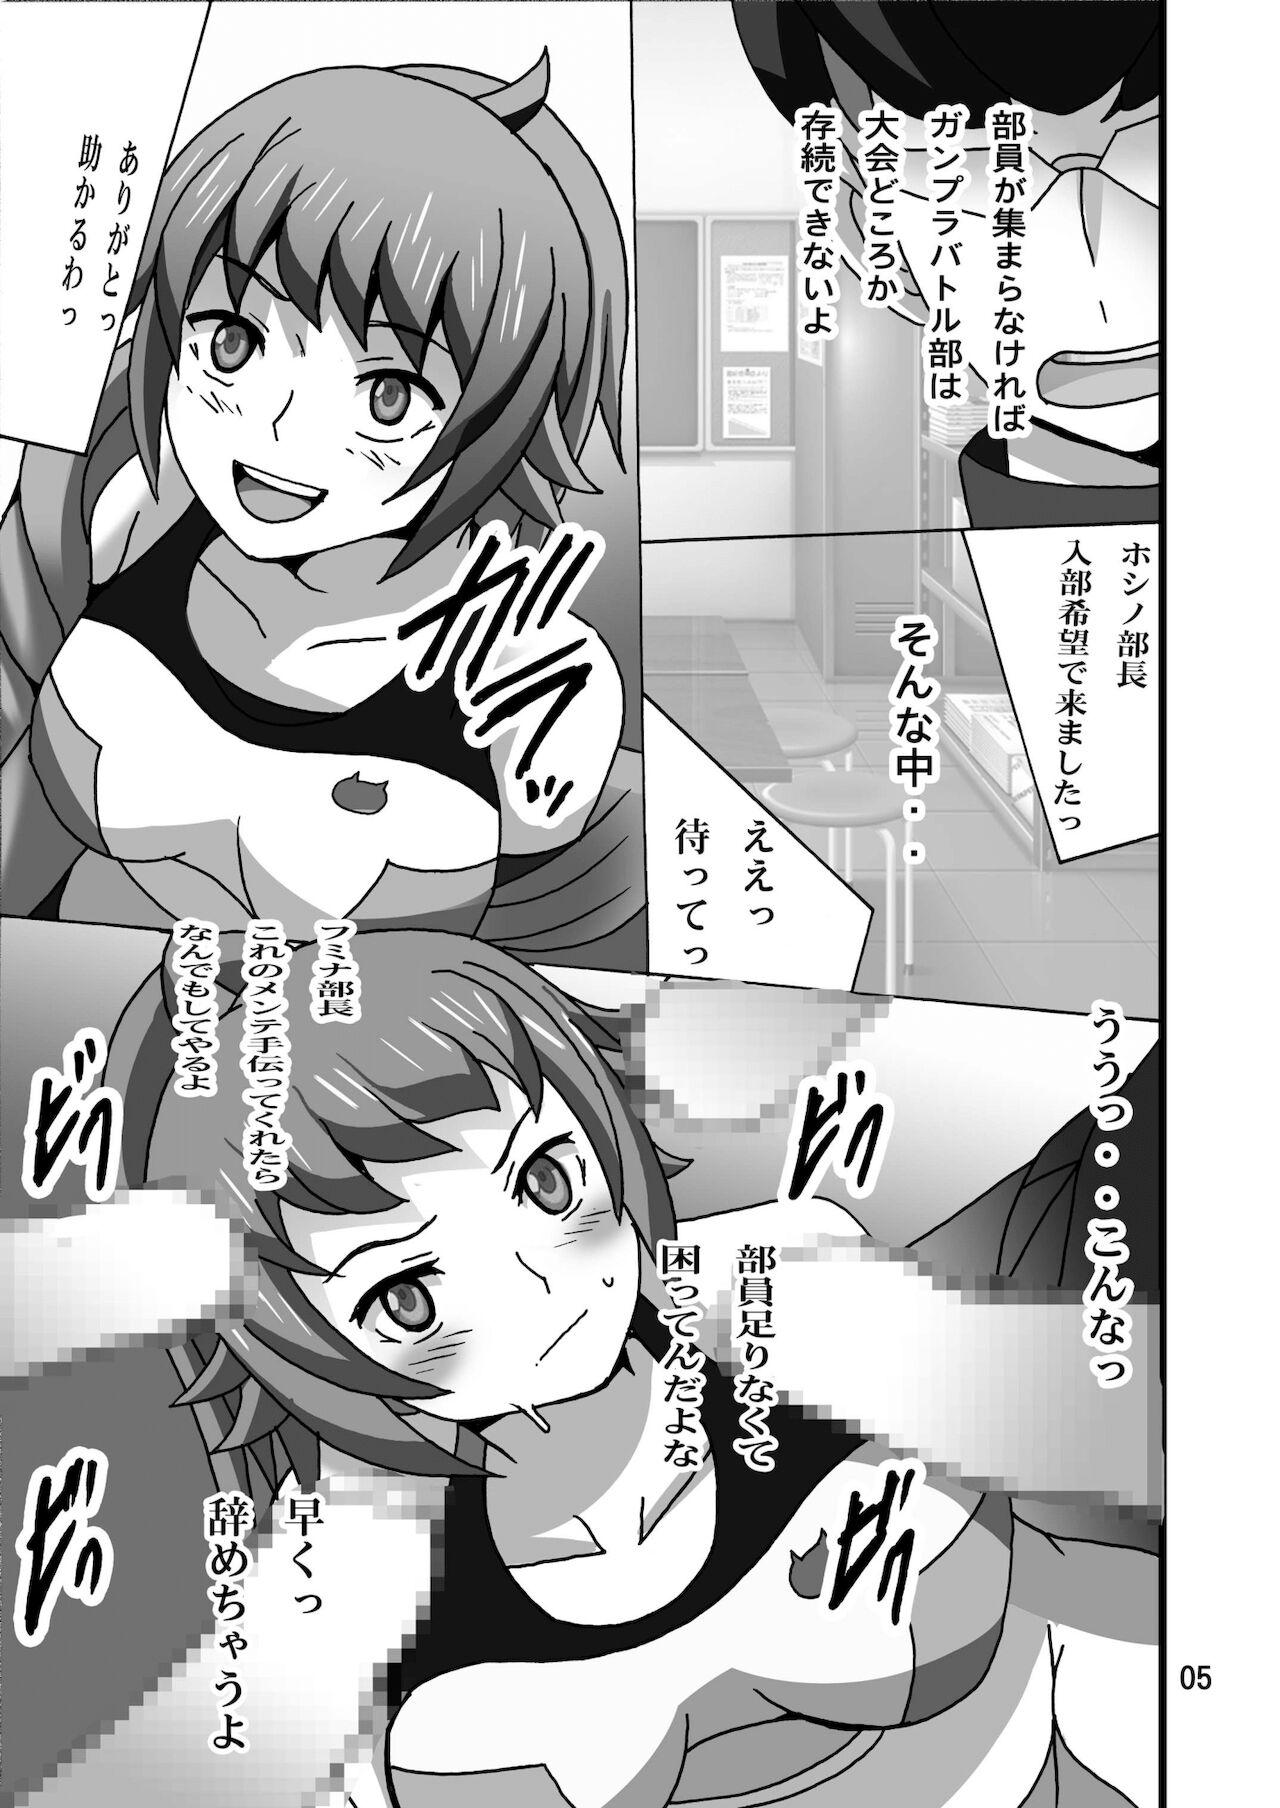 Gros Seins Bucho- de Asobou - Gundam build fighters try Picked Up - Page 5